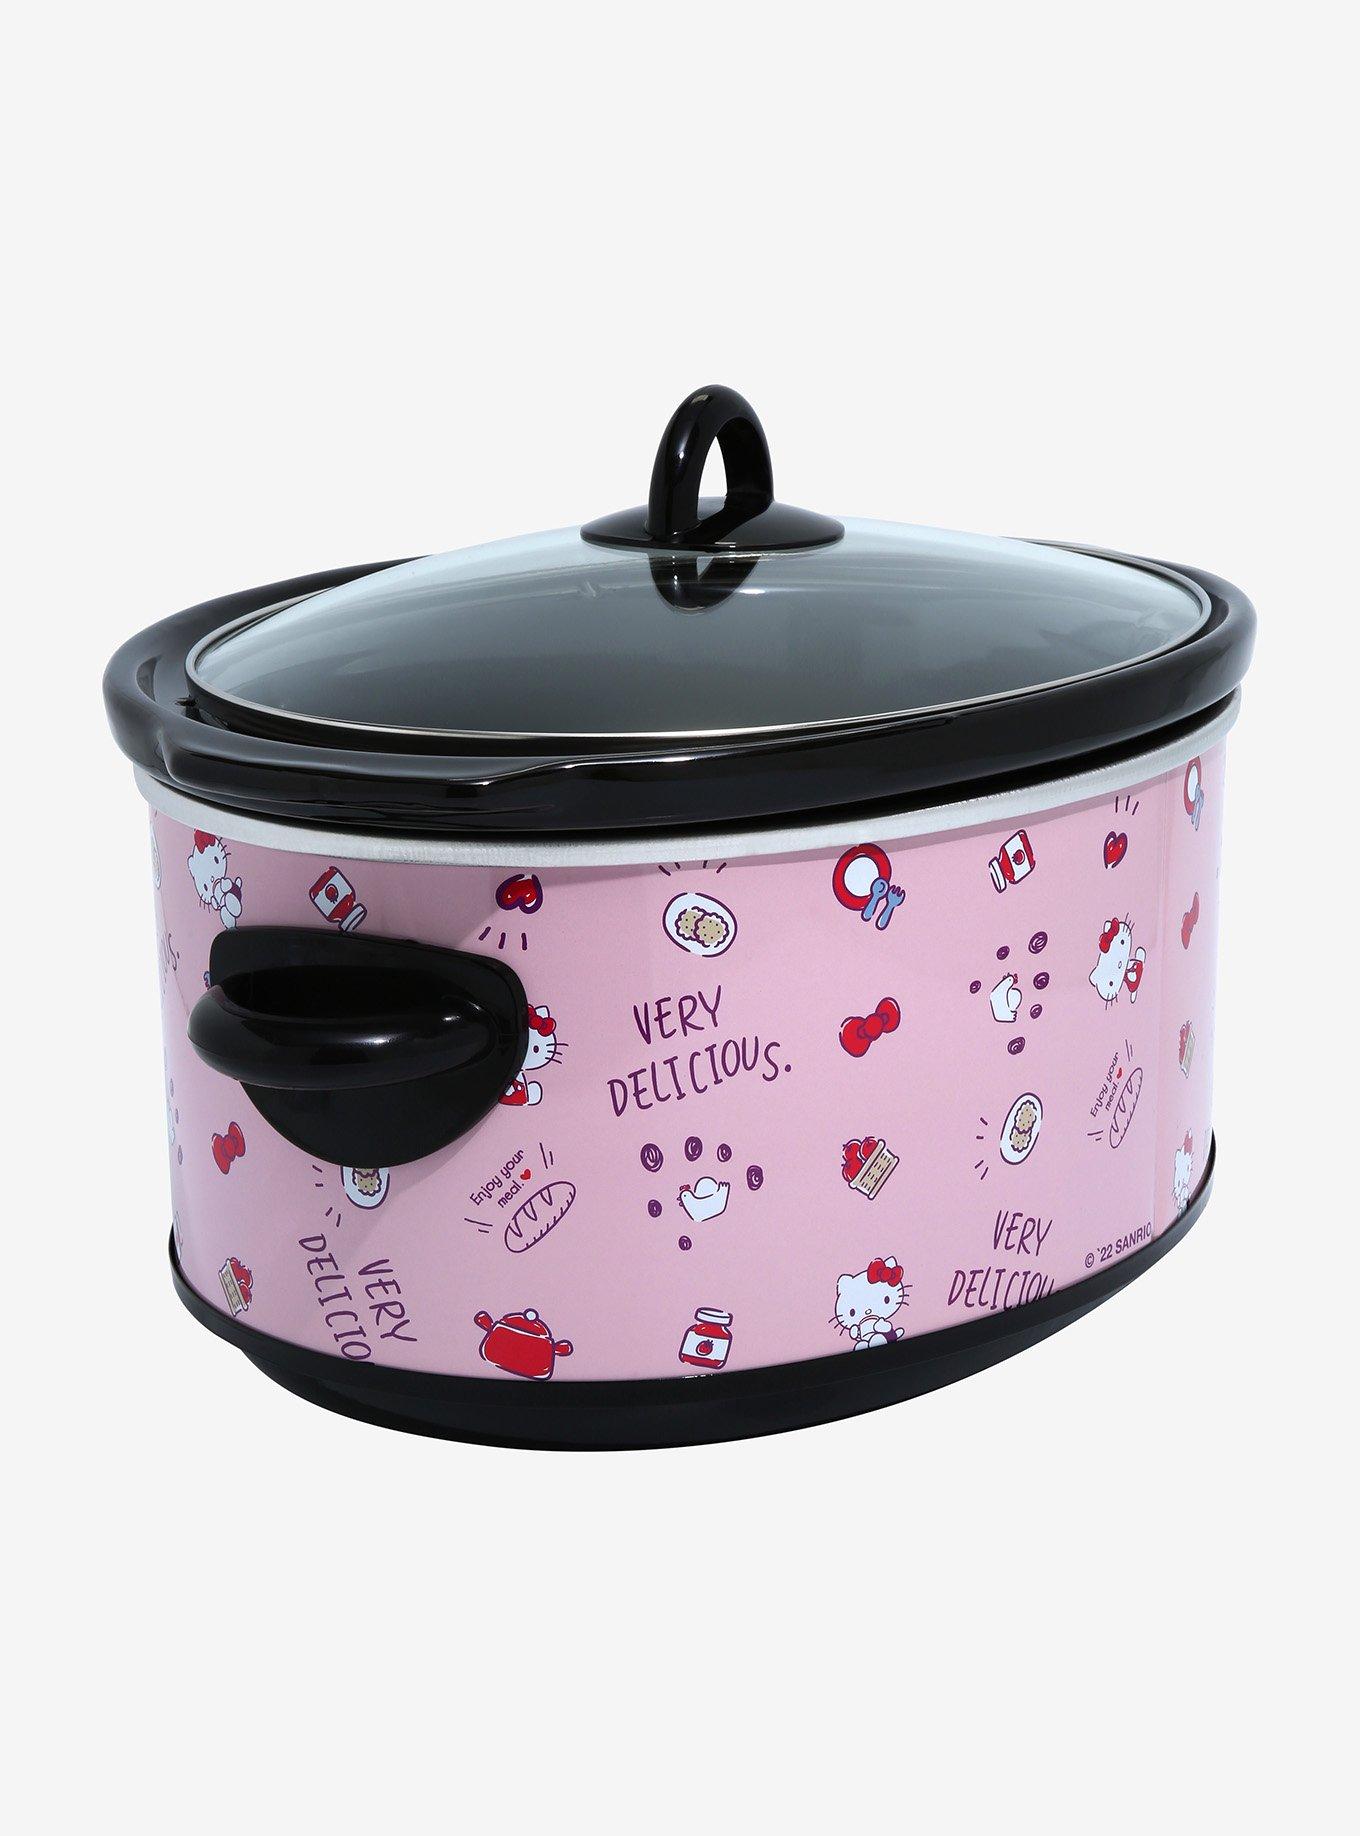 Hello Kitty Slow Cooker  Urban Outfitters Japan - Clothing, Music, Home &  Accessories